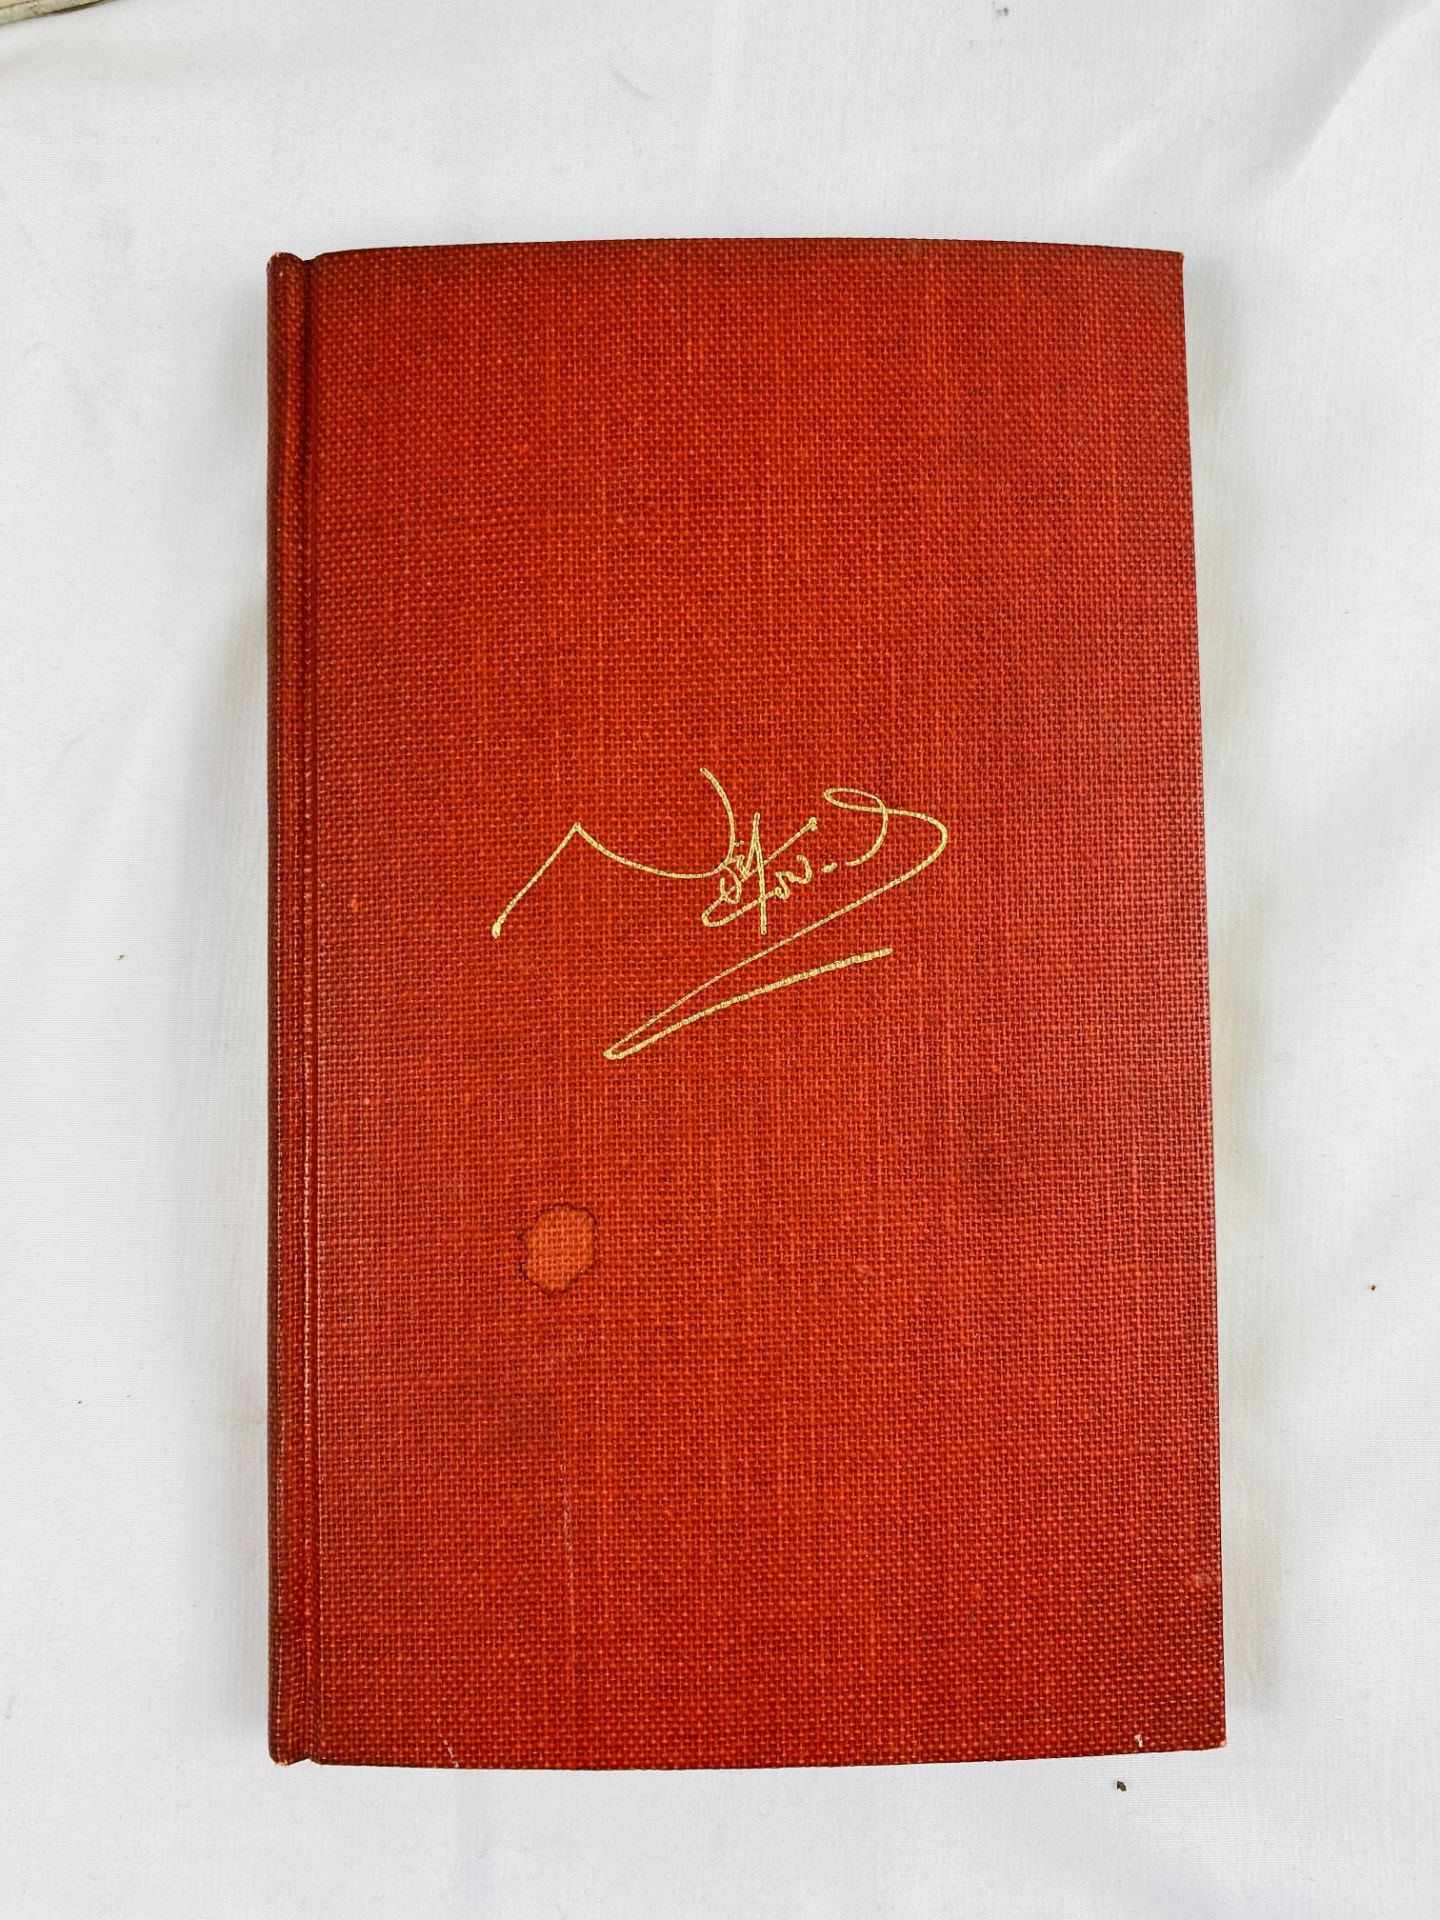 Noel Coward, Quadrille, together with two copies of The Art of Noel Coward by Robert Greacen - Image 4 of 7